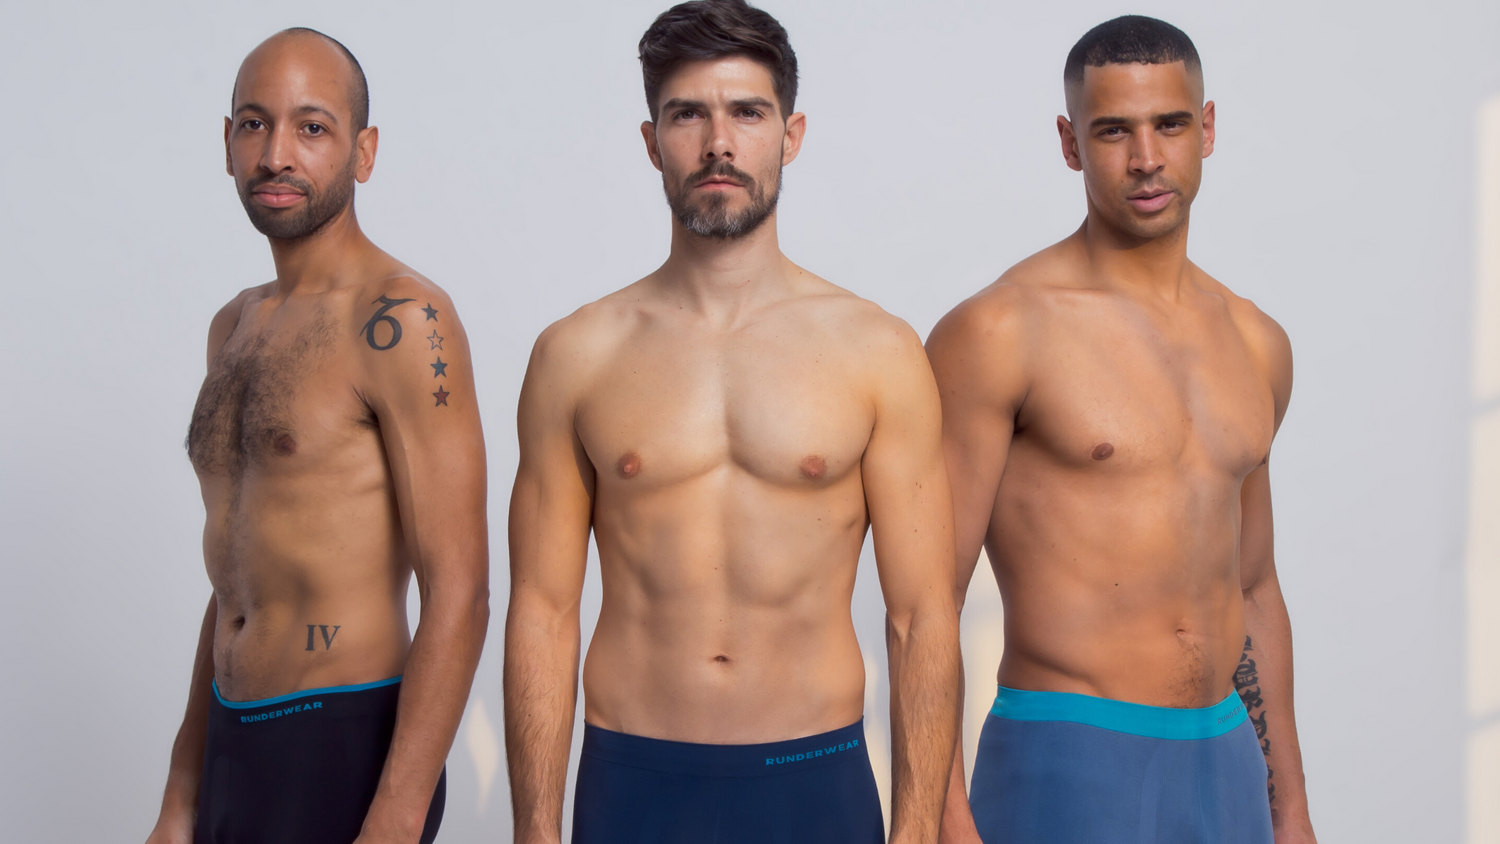 TRIED & TESTED: Runderwear - Healthy Living London